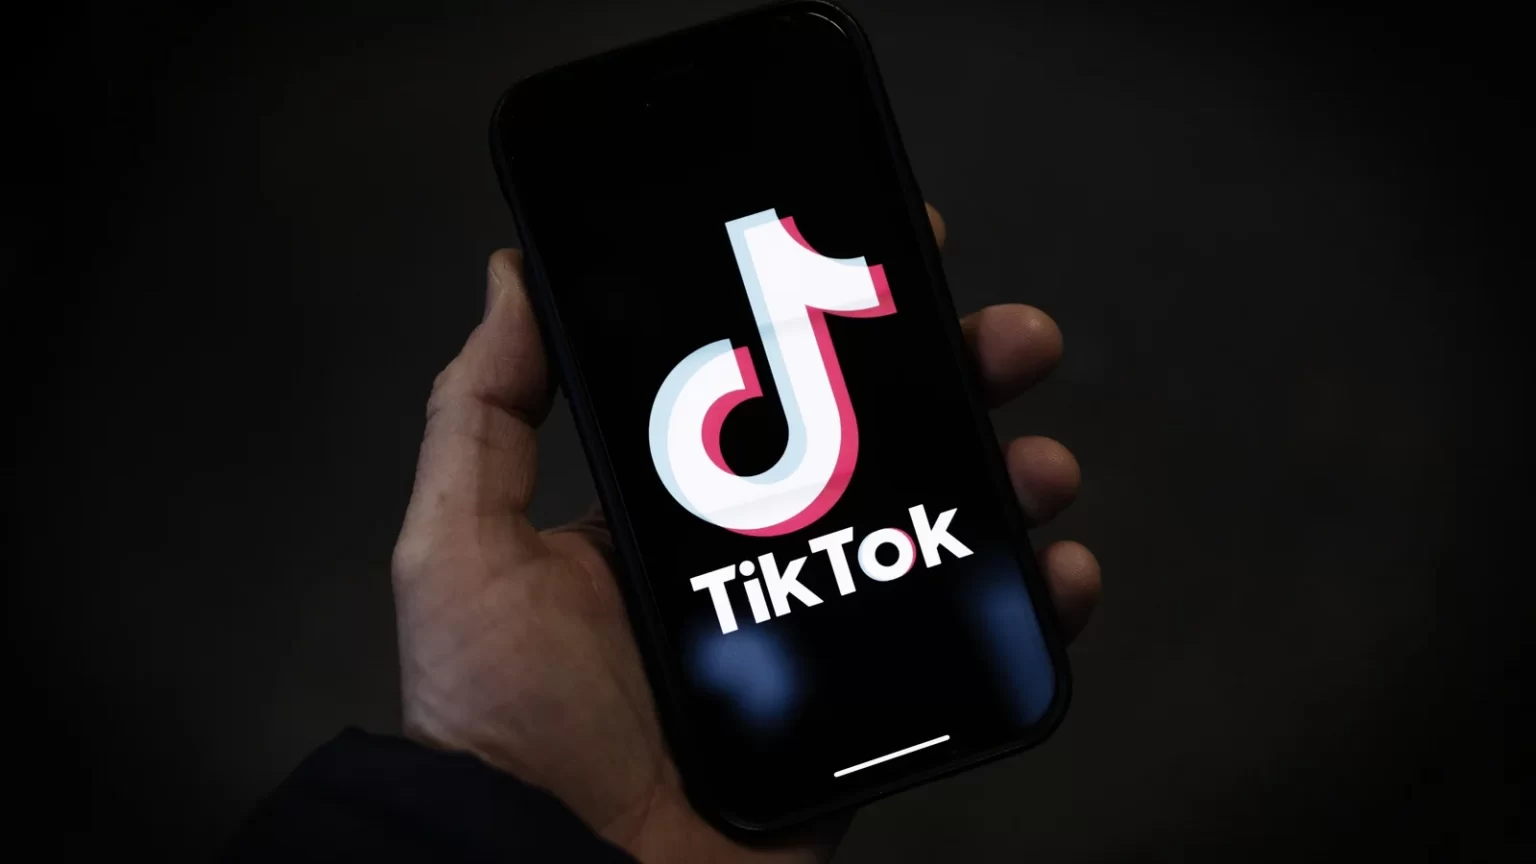 Montana becomes first US state to ban TikTok app on personal devices 